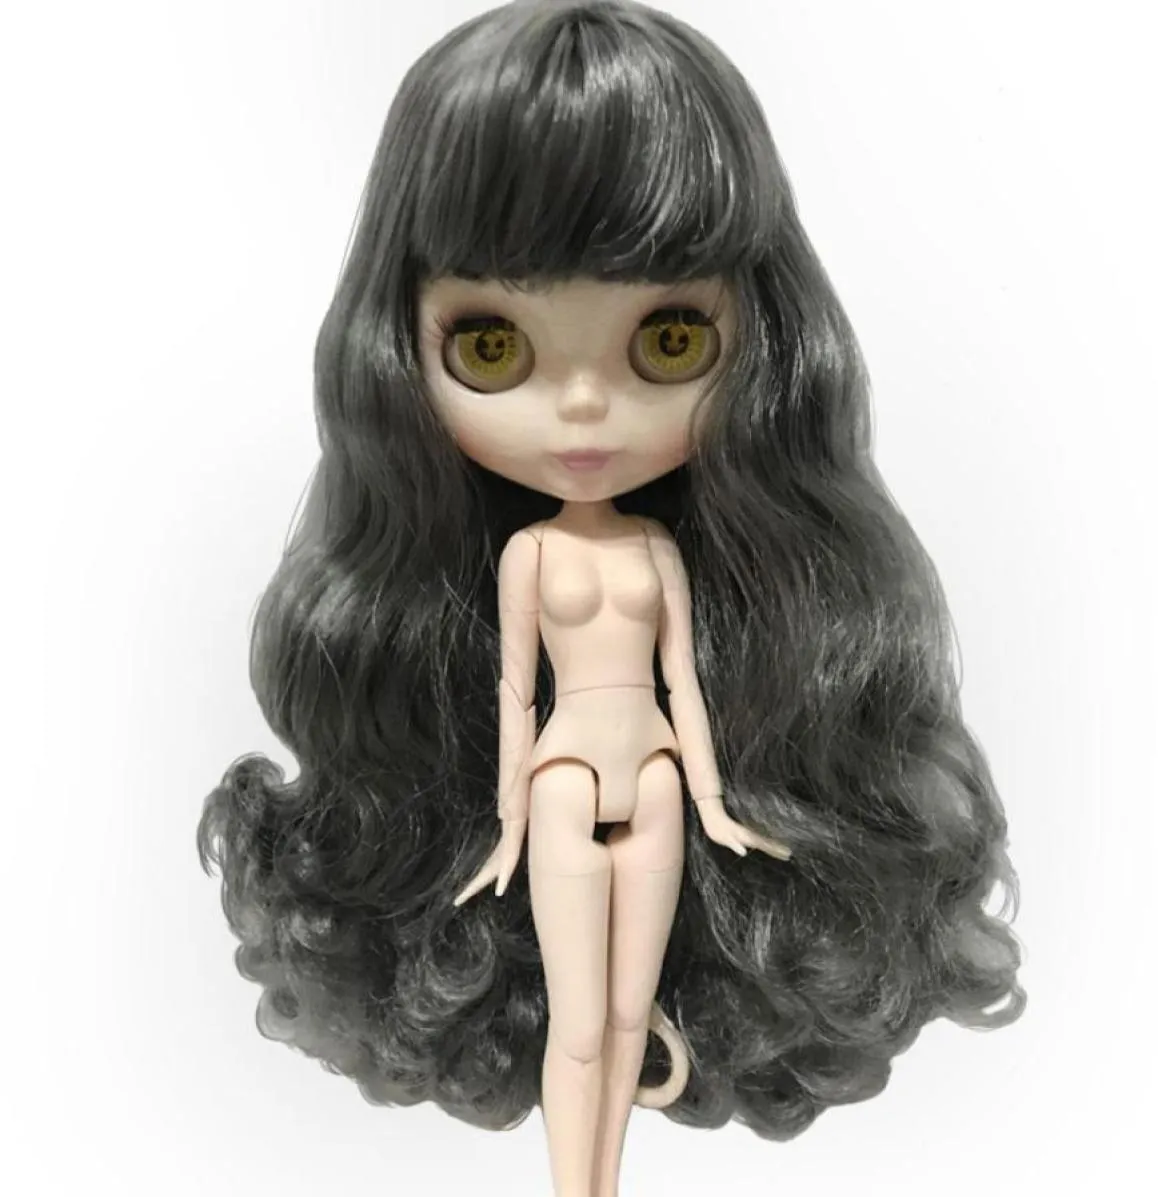 Blythe 17 action Doll Nude Dolls body change a variety of styles curly short straight customizable hair color51225109792314